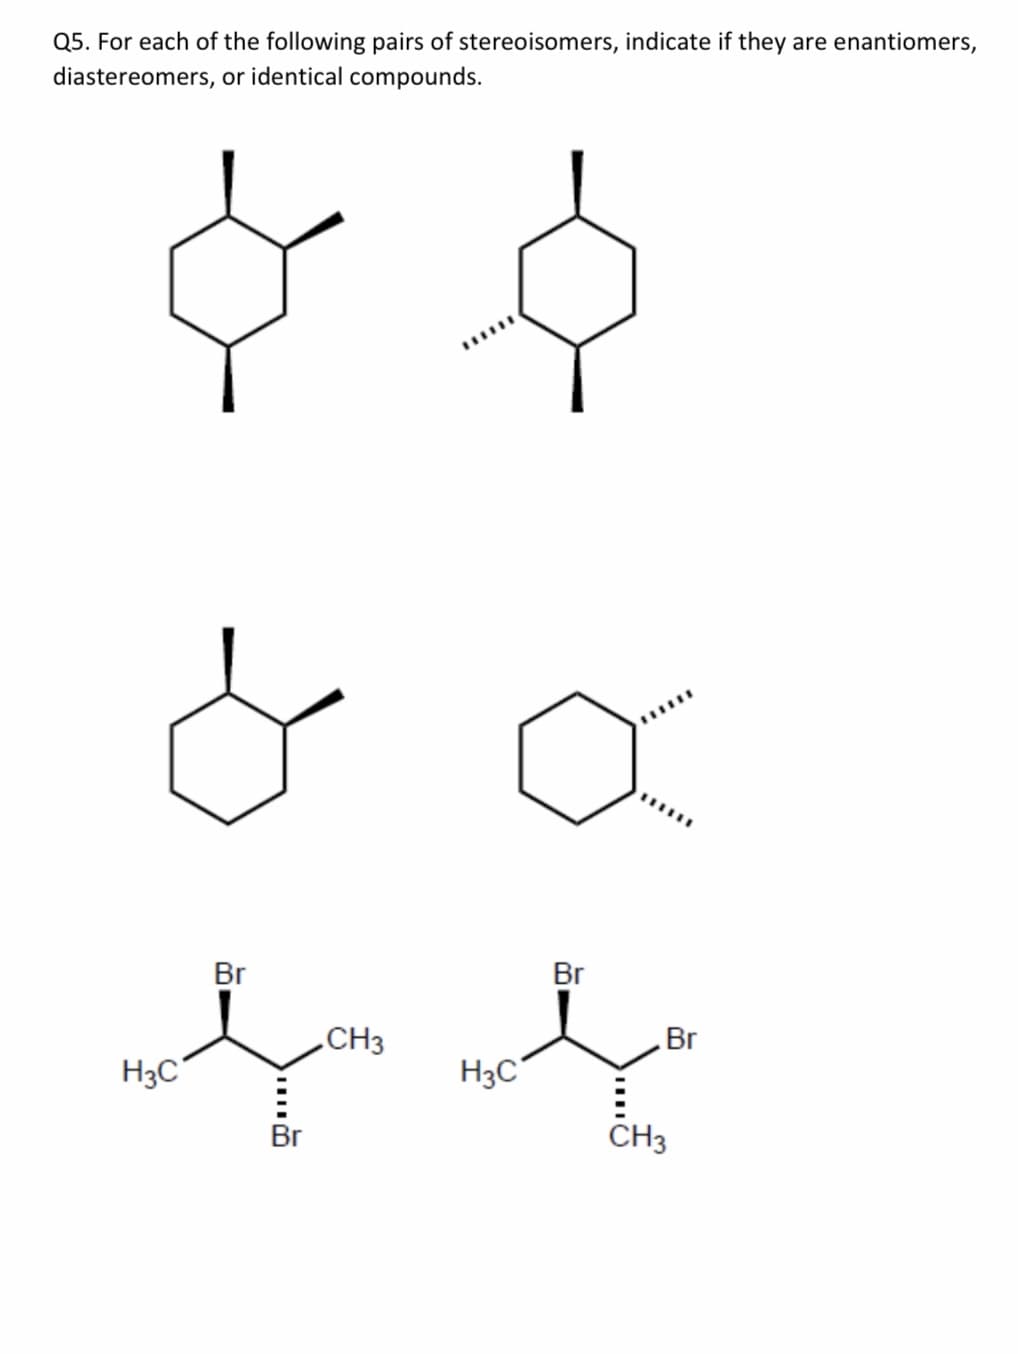 Q5. For each of the following pairs of stereoisomers, indicate if they are enantiomers,
diastereomers, or identical compounds.
Br
Br
CH3
Br
H3C°
H3C°
Br
CH3
